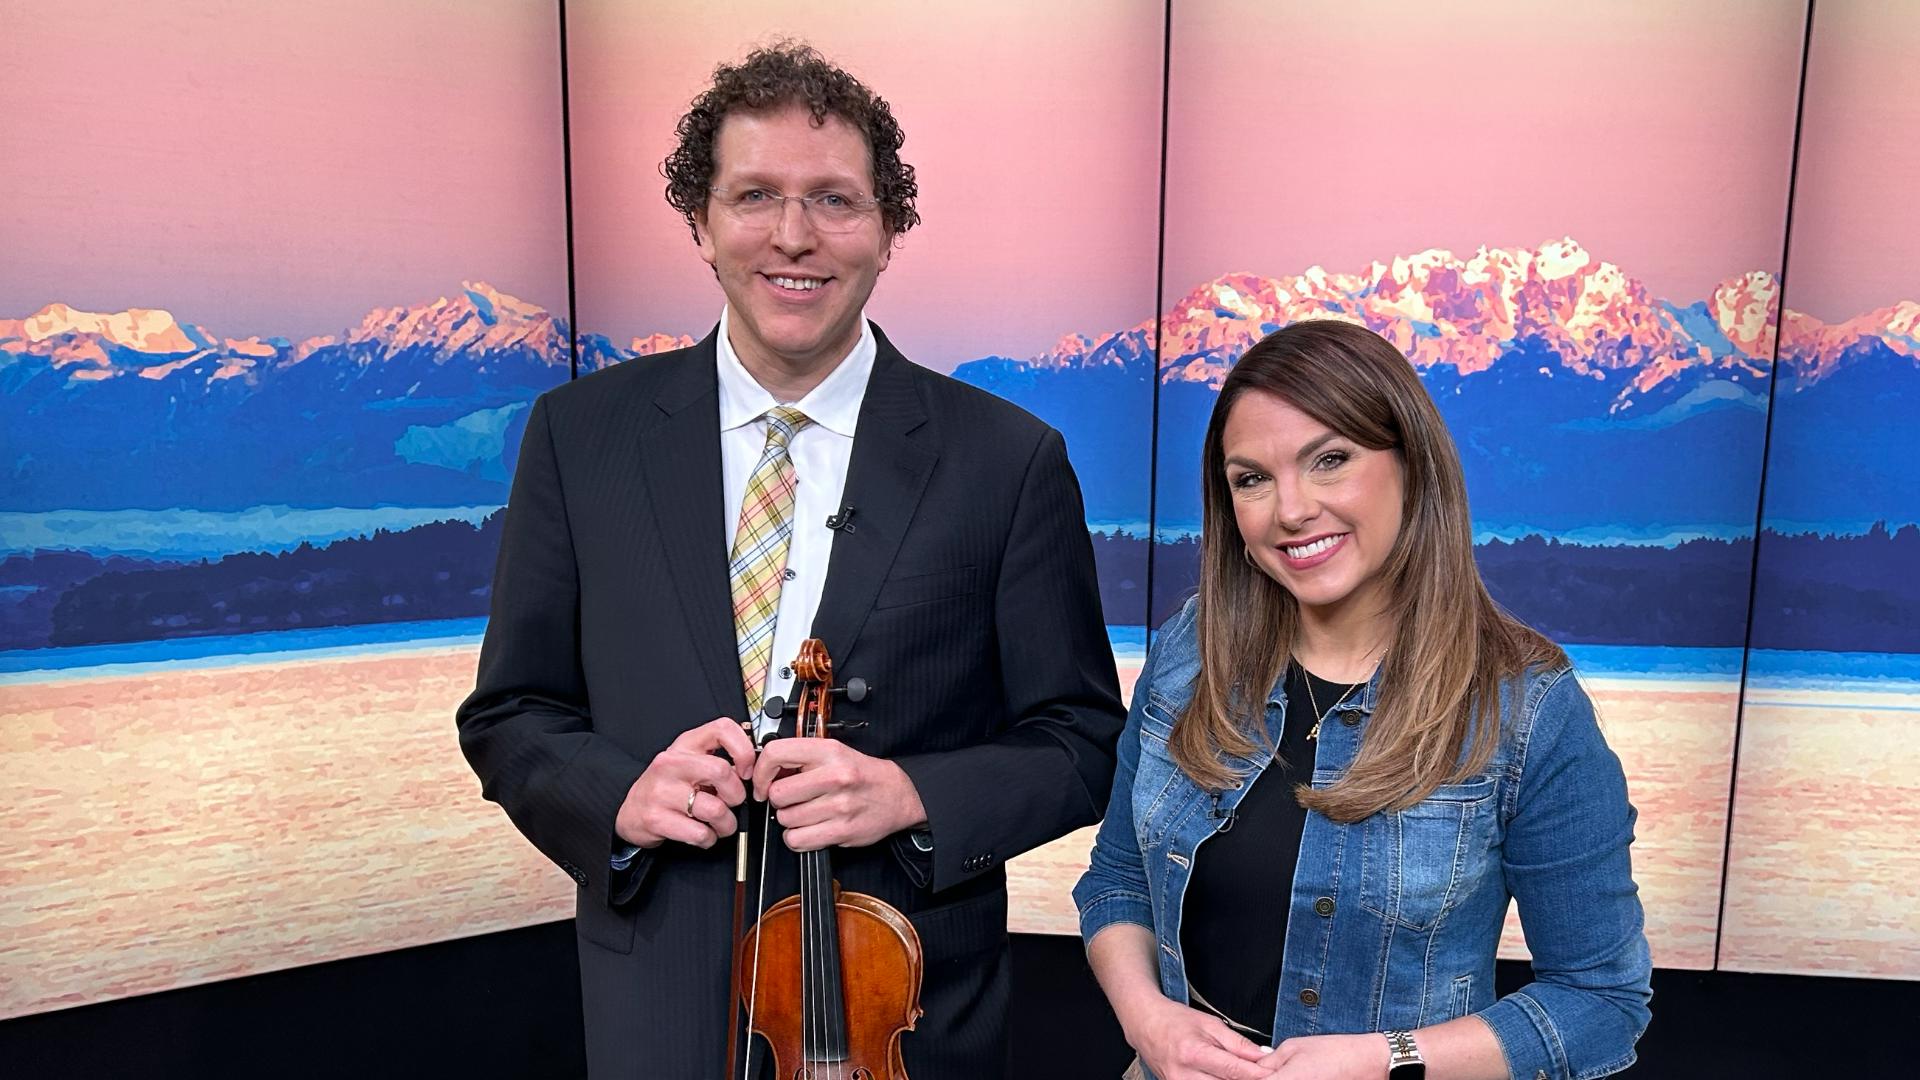 “Noah’s Playlist” is happening May 3 at 7:30 p.m. at Benaroya Hall in Downtown Seattle. #newdaynw